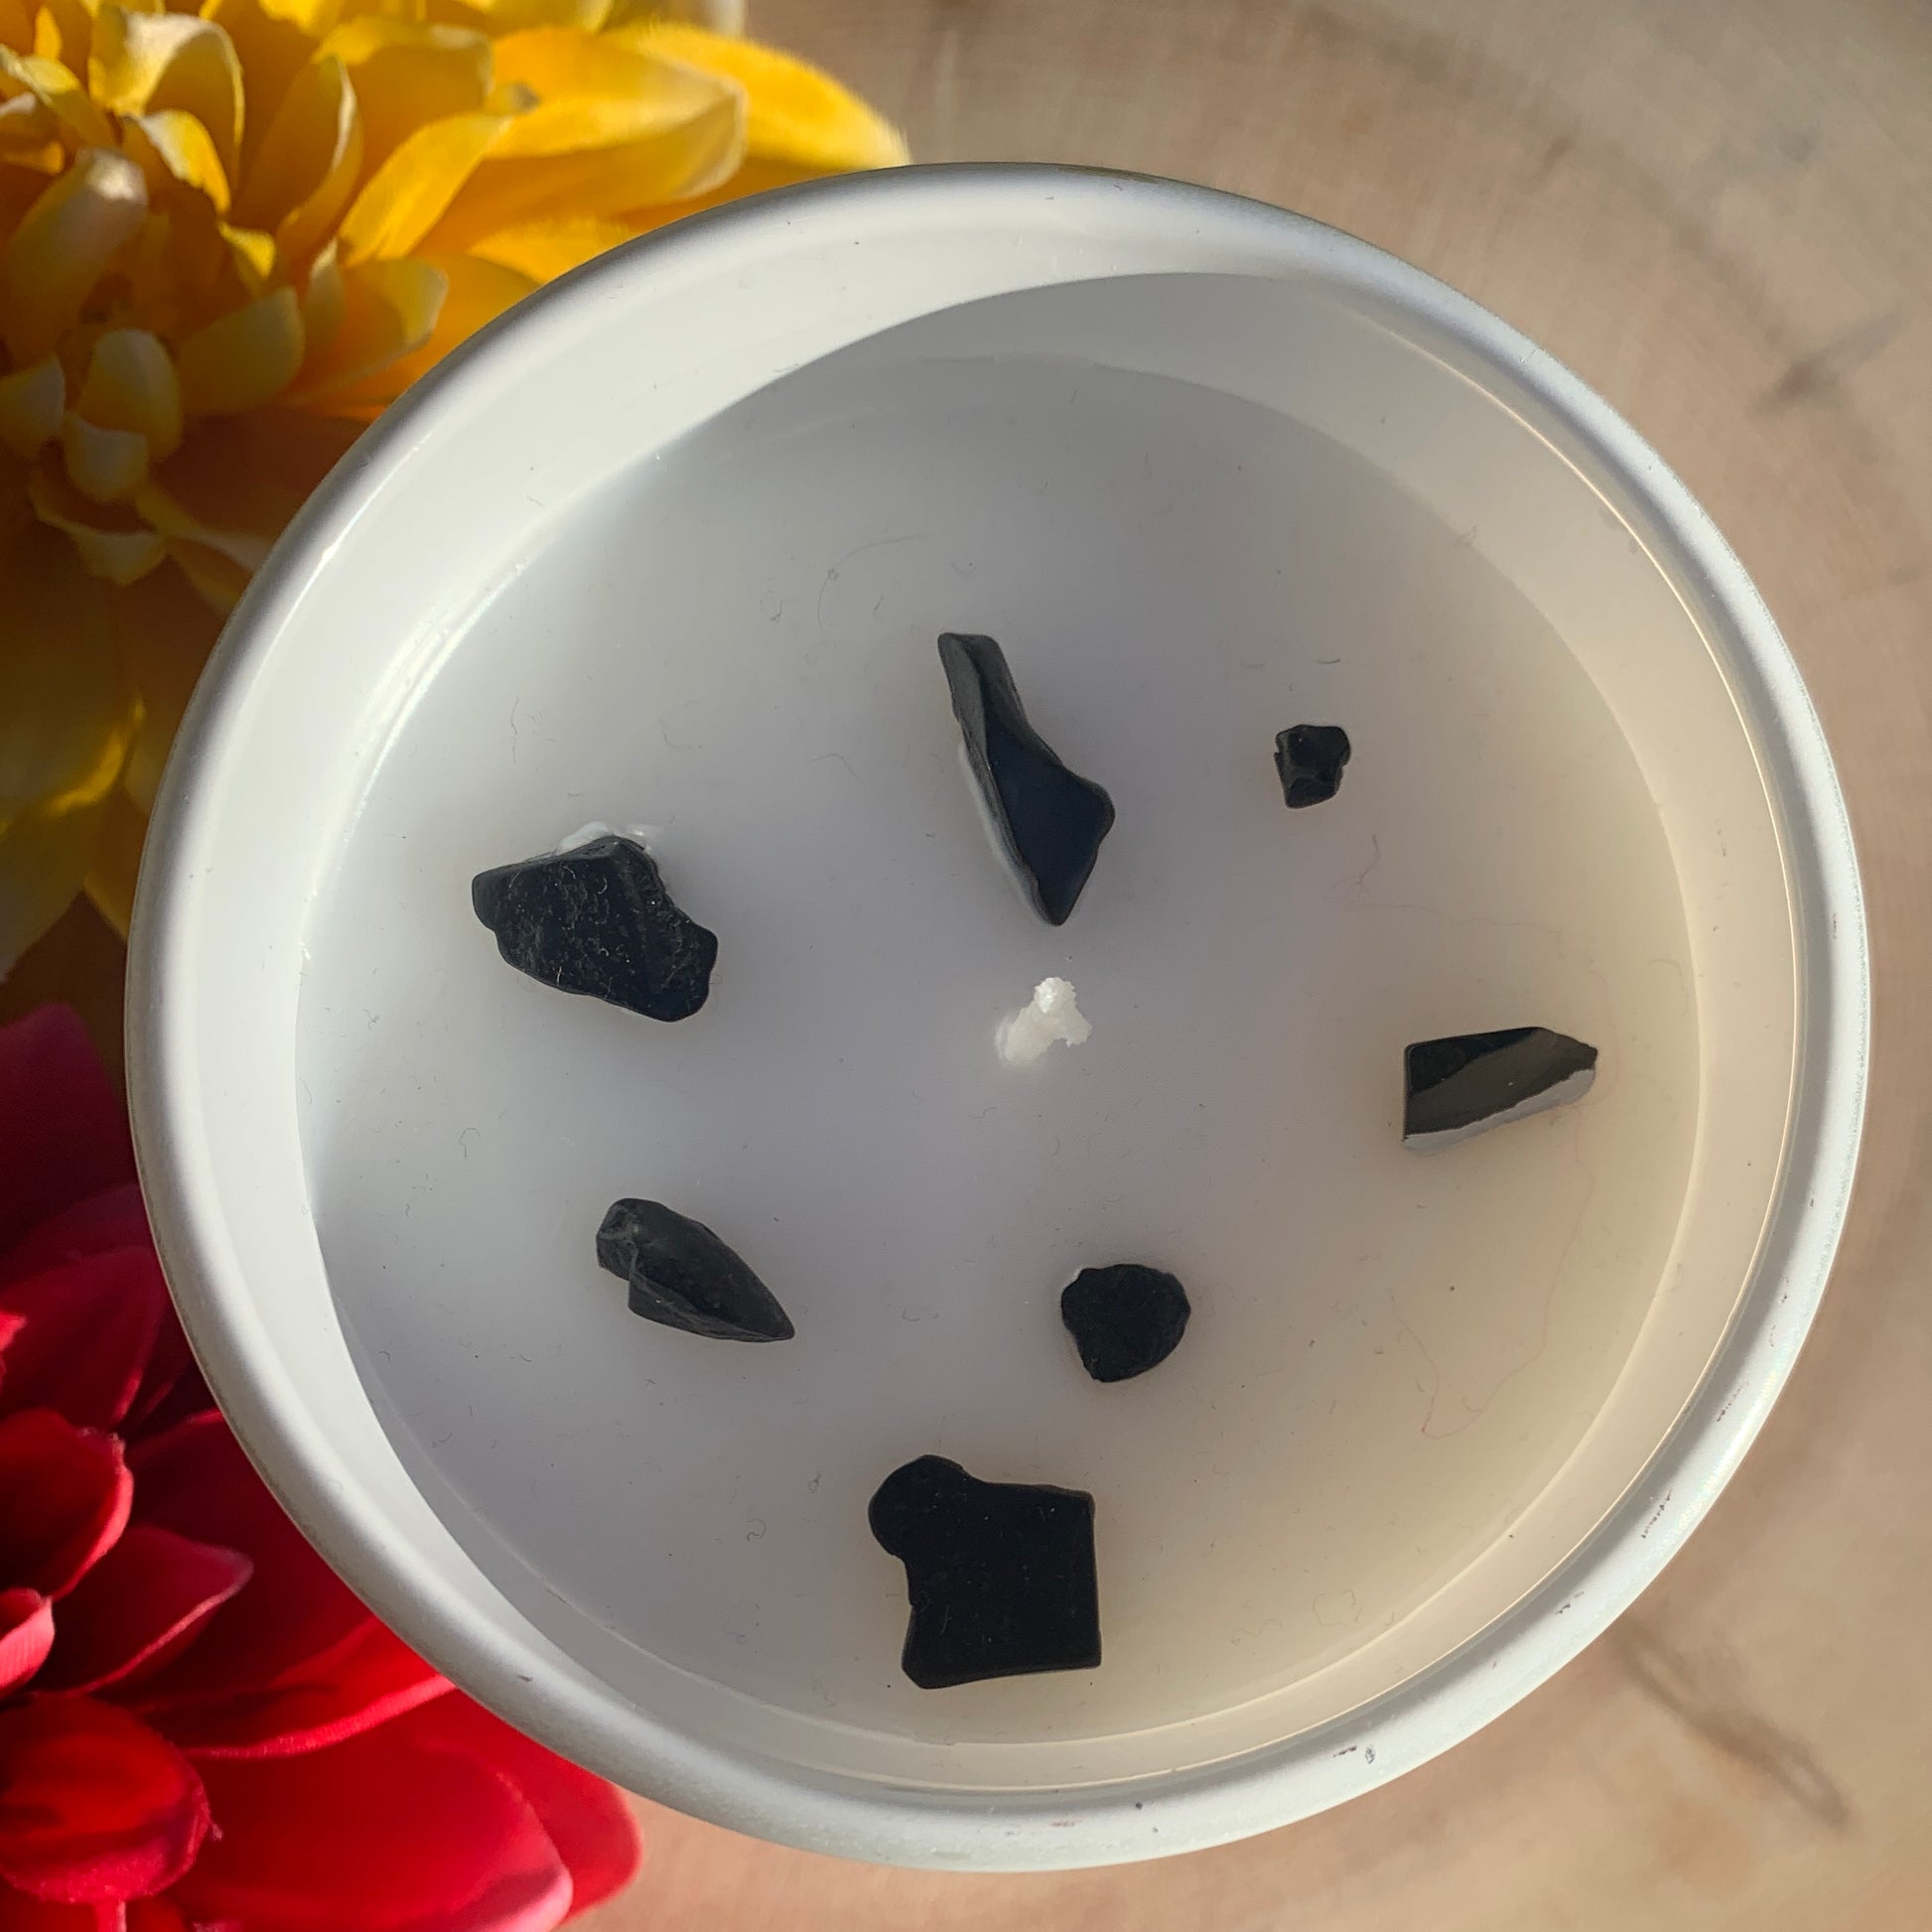 🕯️This photo shows the angel wing jar in white containing black tourmaline, representing the protective energy and guidance of angels that blocks negative energy while promoting inner strength and resilience.🕯️